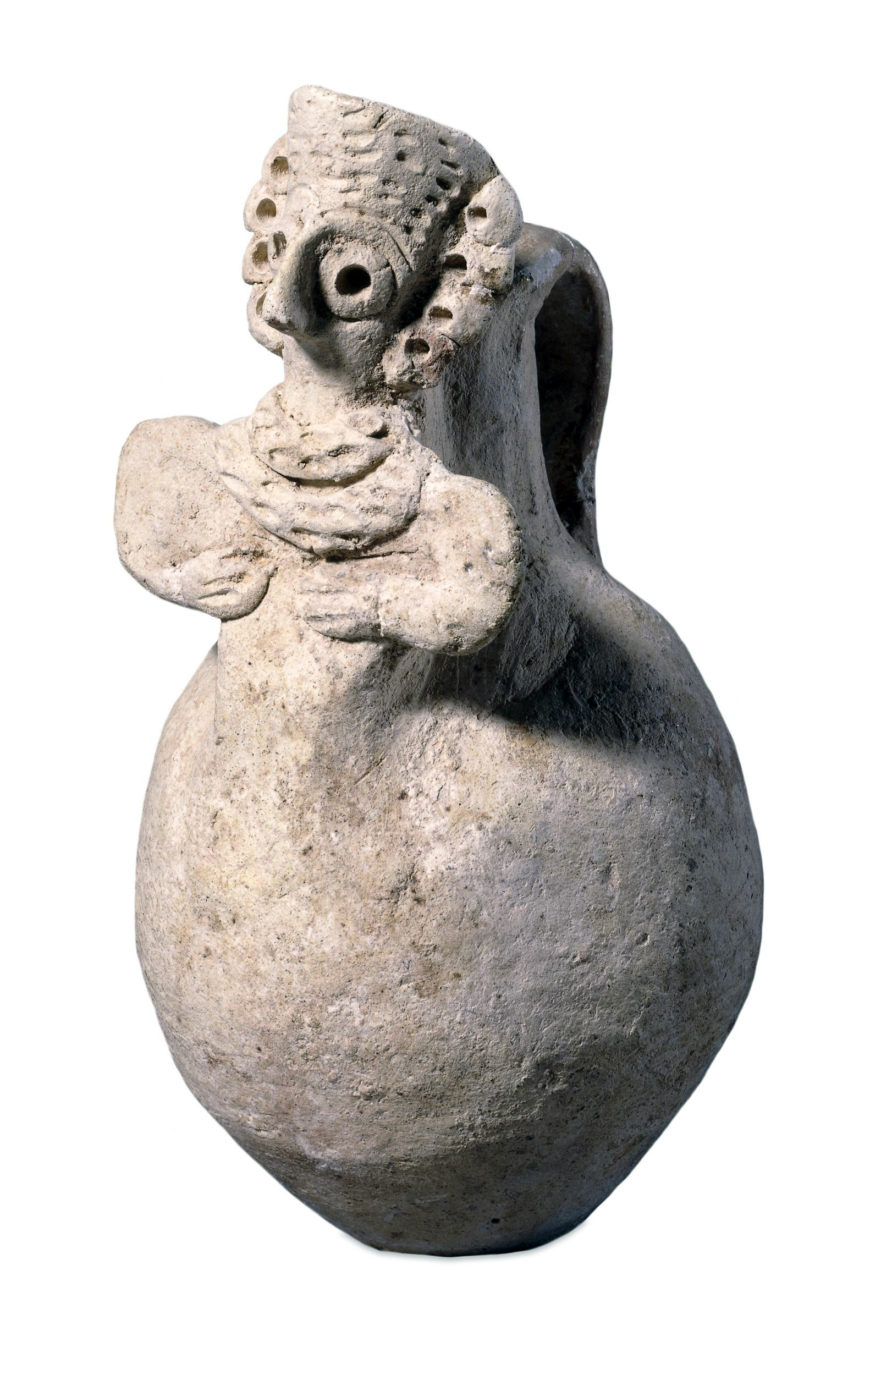 Pottery juglet, Amorite, about 2400–2000 B.C.E., from the Middle Euphrates region, Syria (© The Trustees of The British Museum)